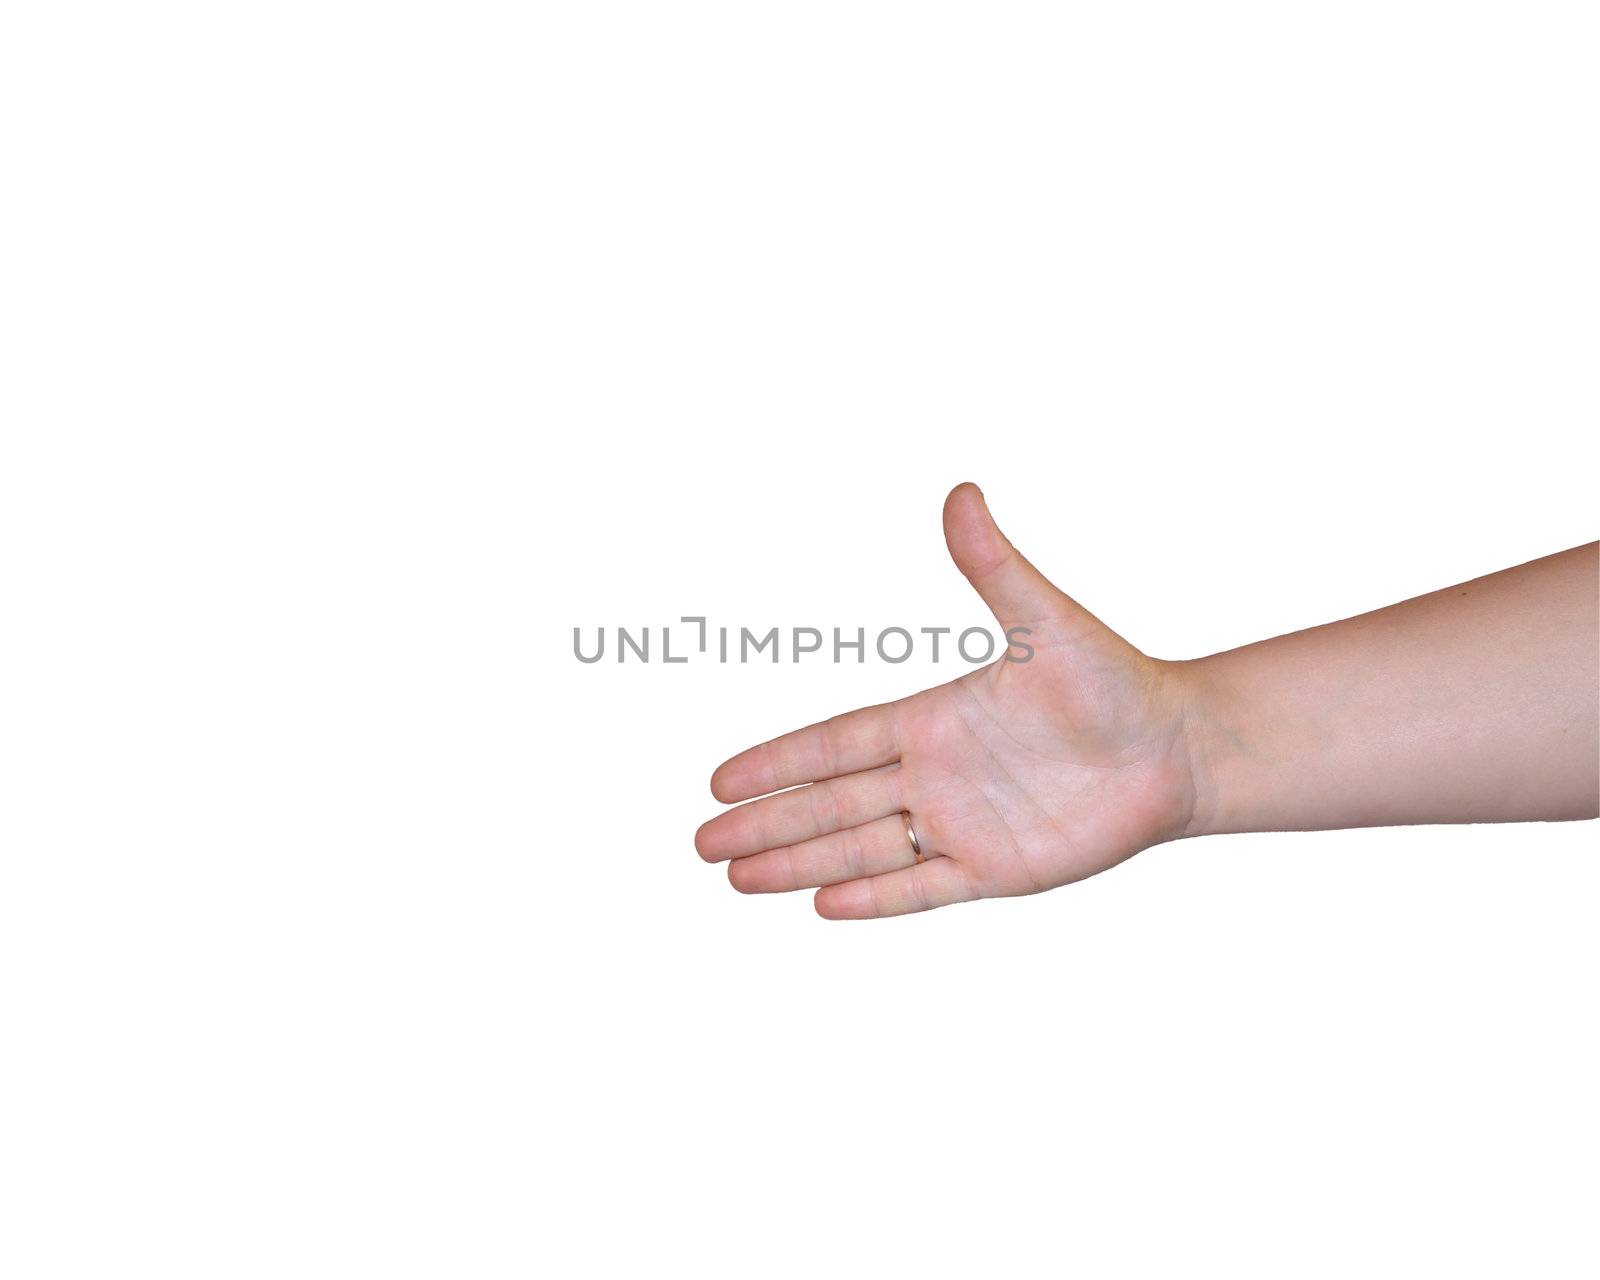 On white background, the photography of the hand.